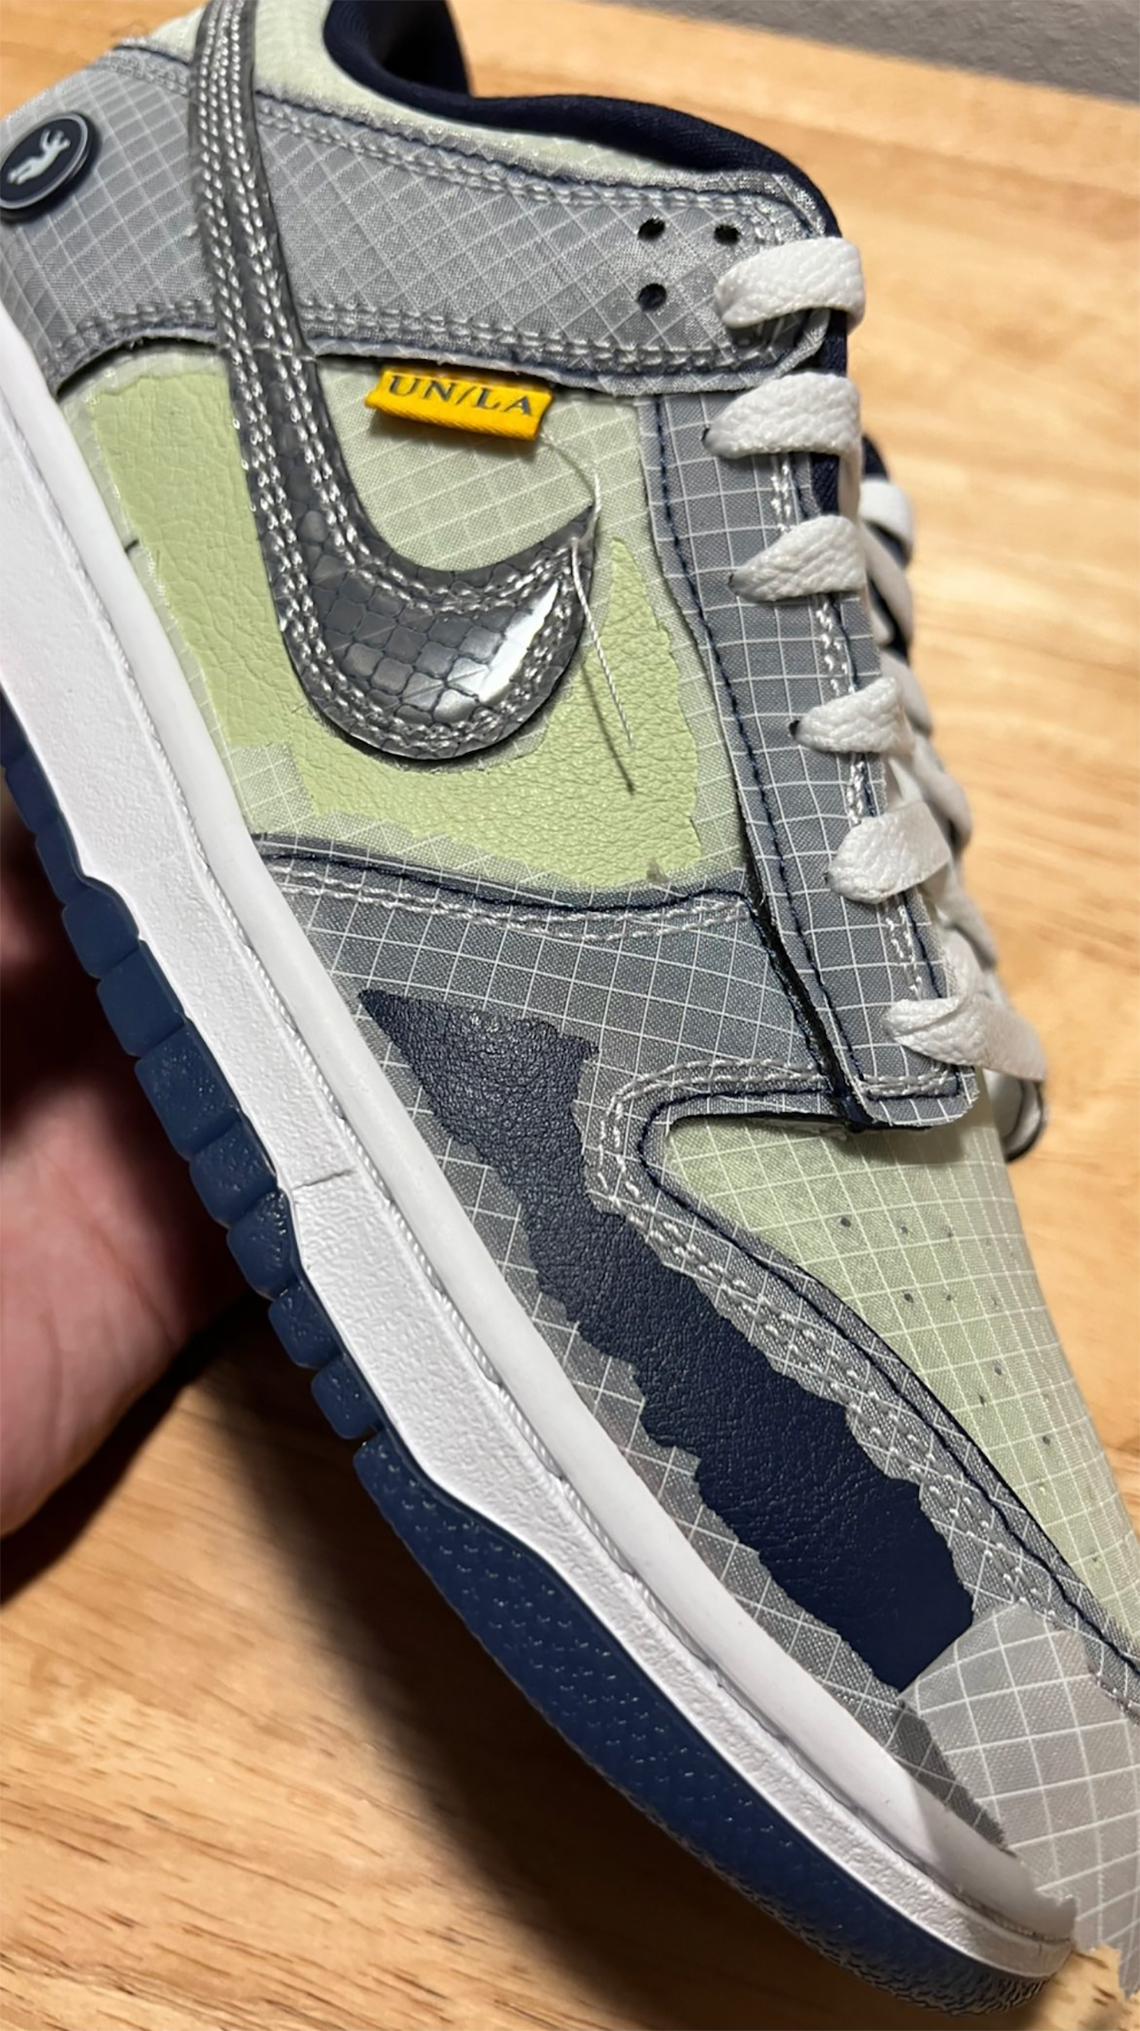 Union Nike Dunk Low Pistachio Tearaway Uppers 1